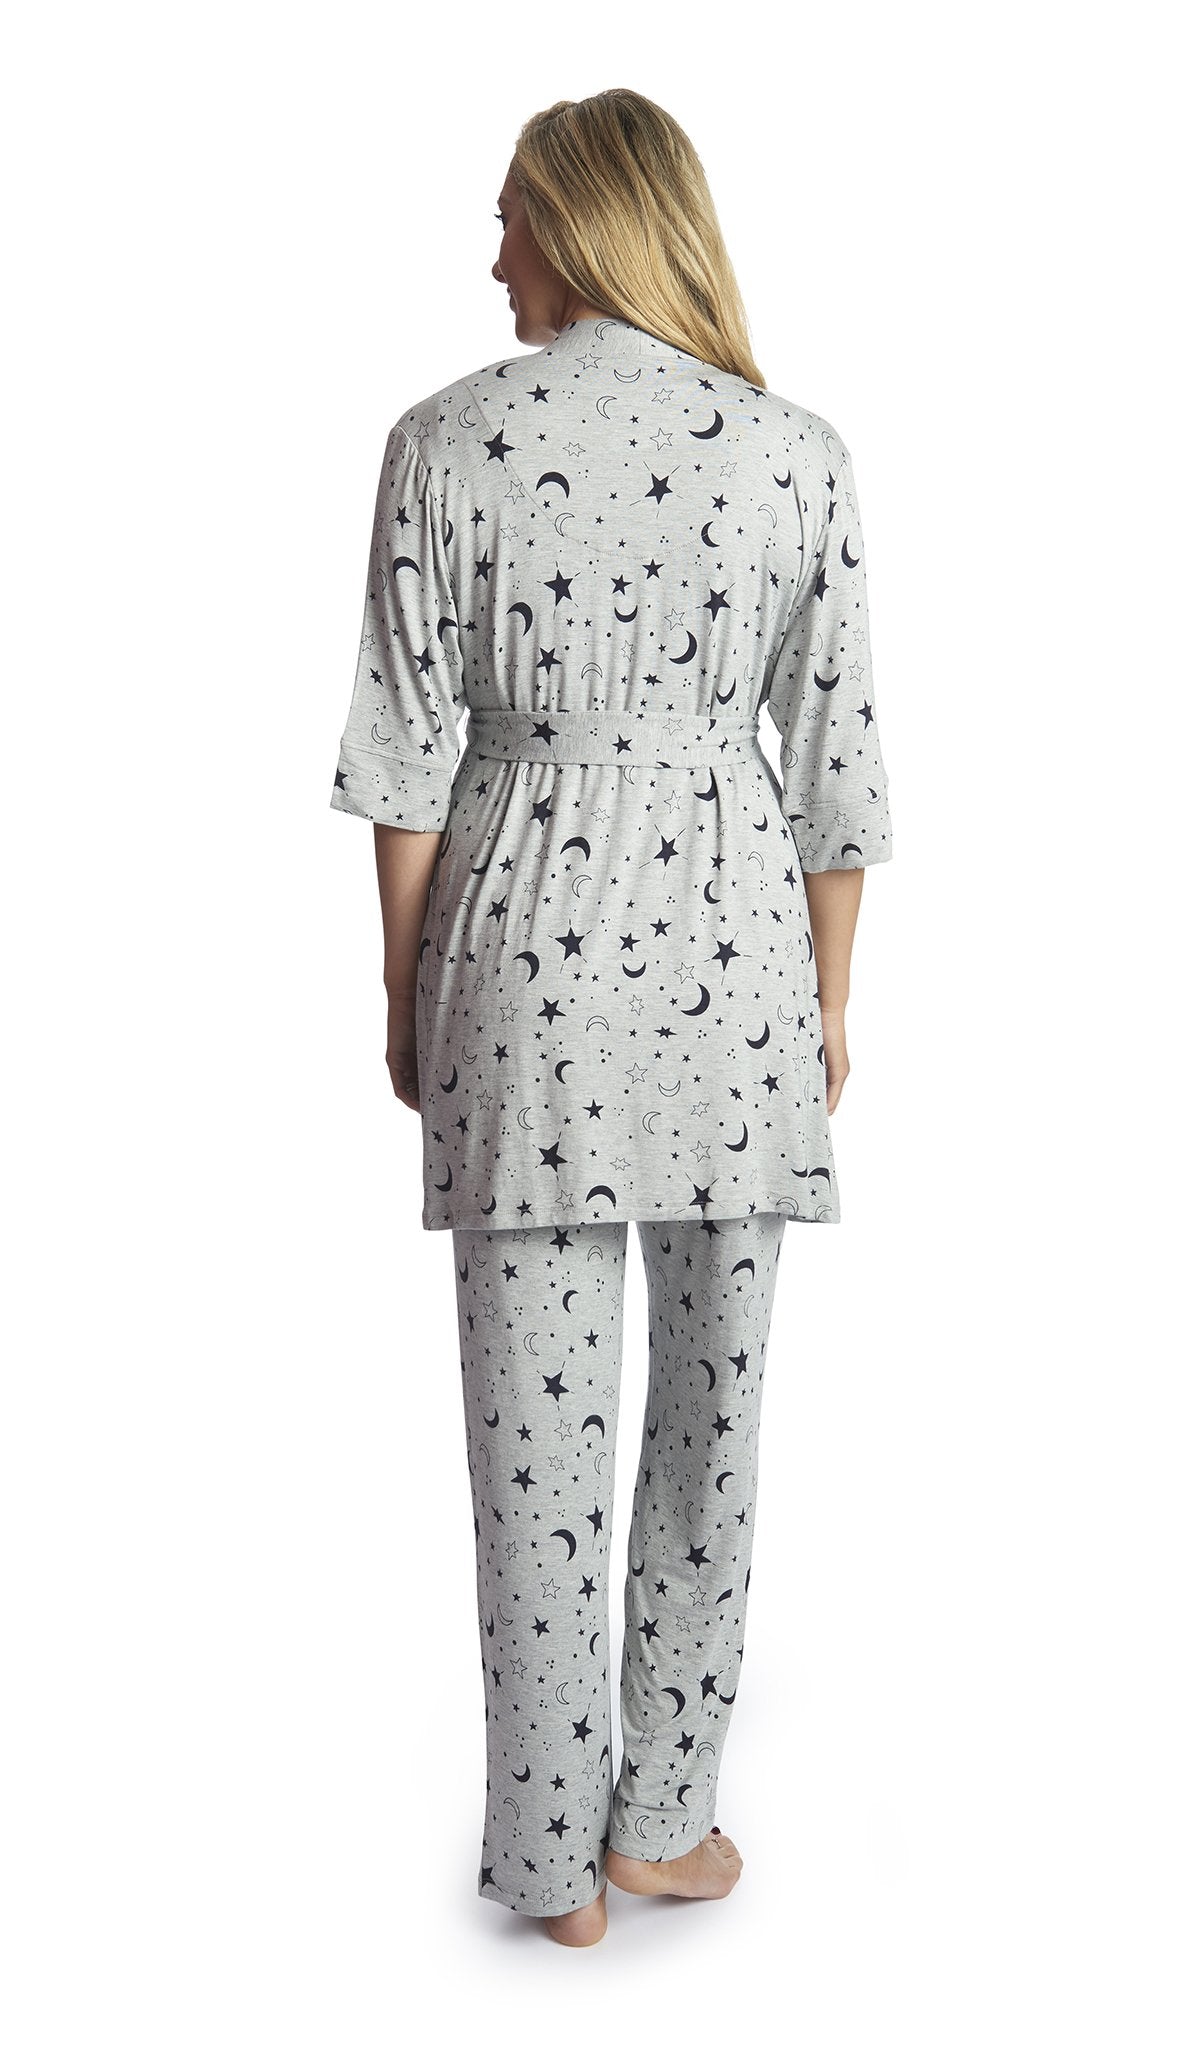 Twinkle Night Robe  - Doodlebug's Children's Boutique